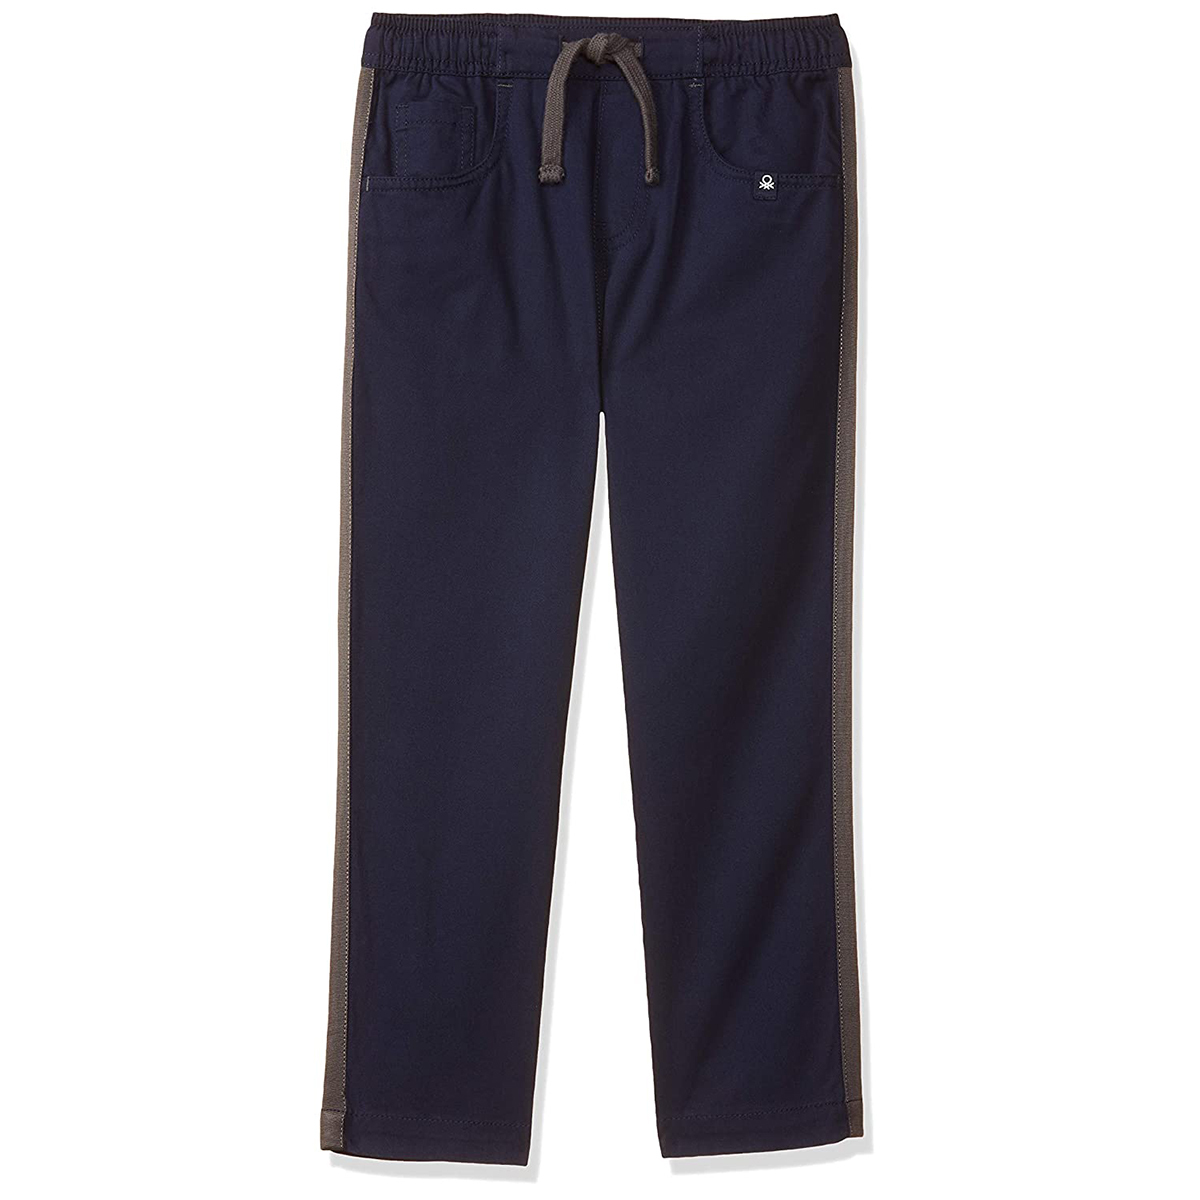 United Colors of Benetton Boy's Regular Fit Casual Pants- Navy Blue